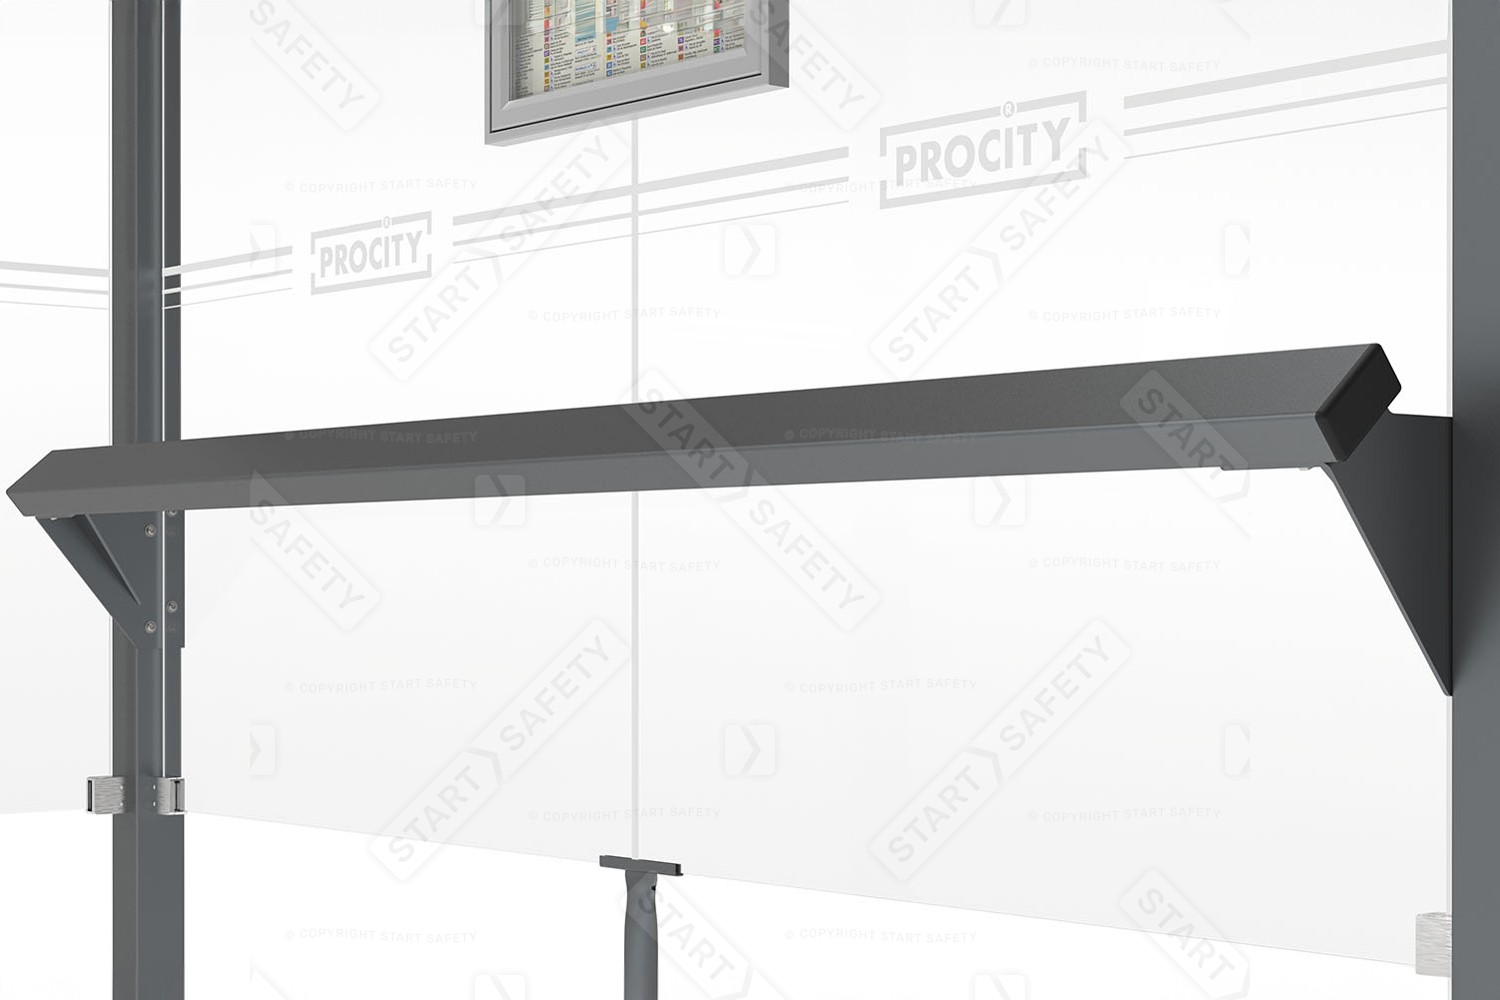 Perch Bar For Procity Modulo, Voute and Milan Shelters